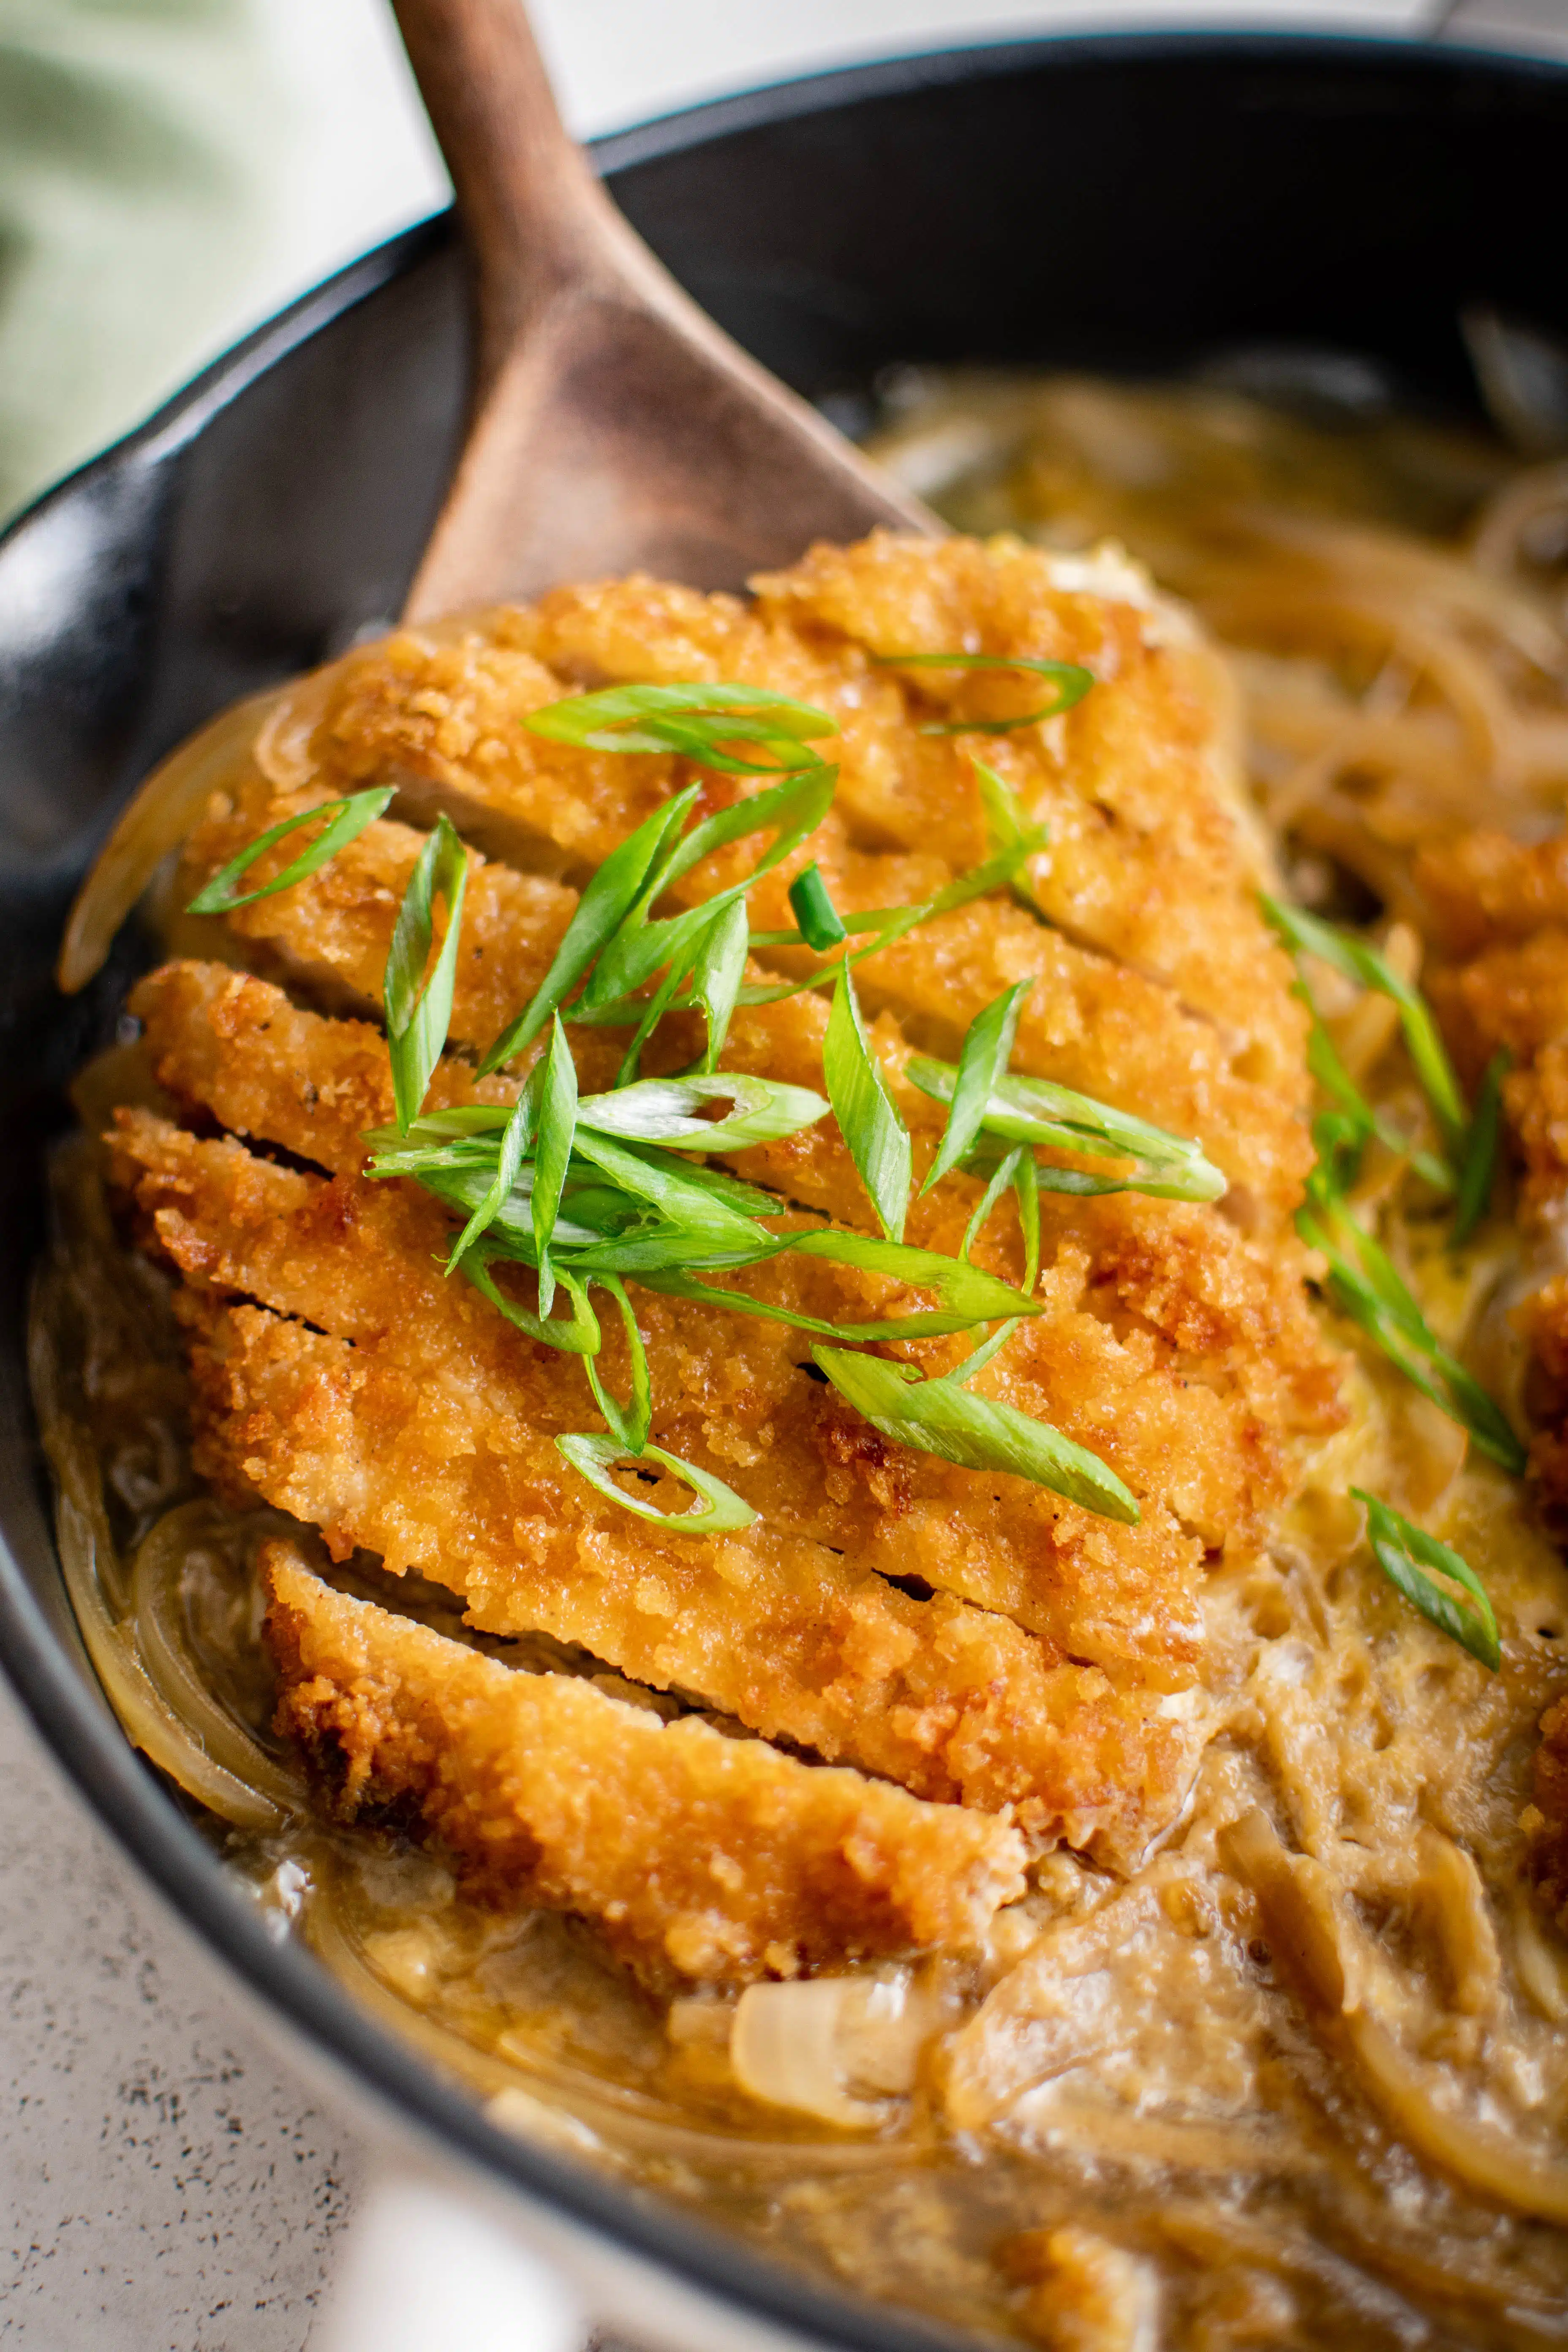 Large pan filled with a large sliced breaded and deep-fried pork cutlet garnished with sliced green onions set on top of saucy sauteed sliced onions with egg.